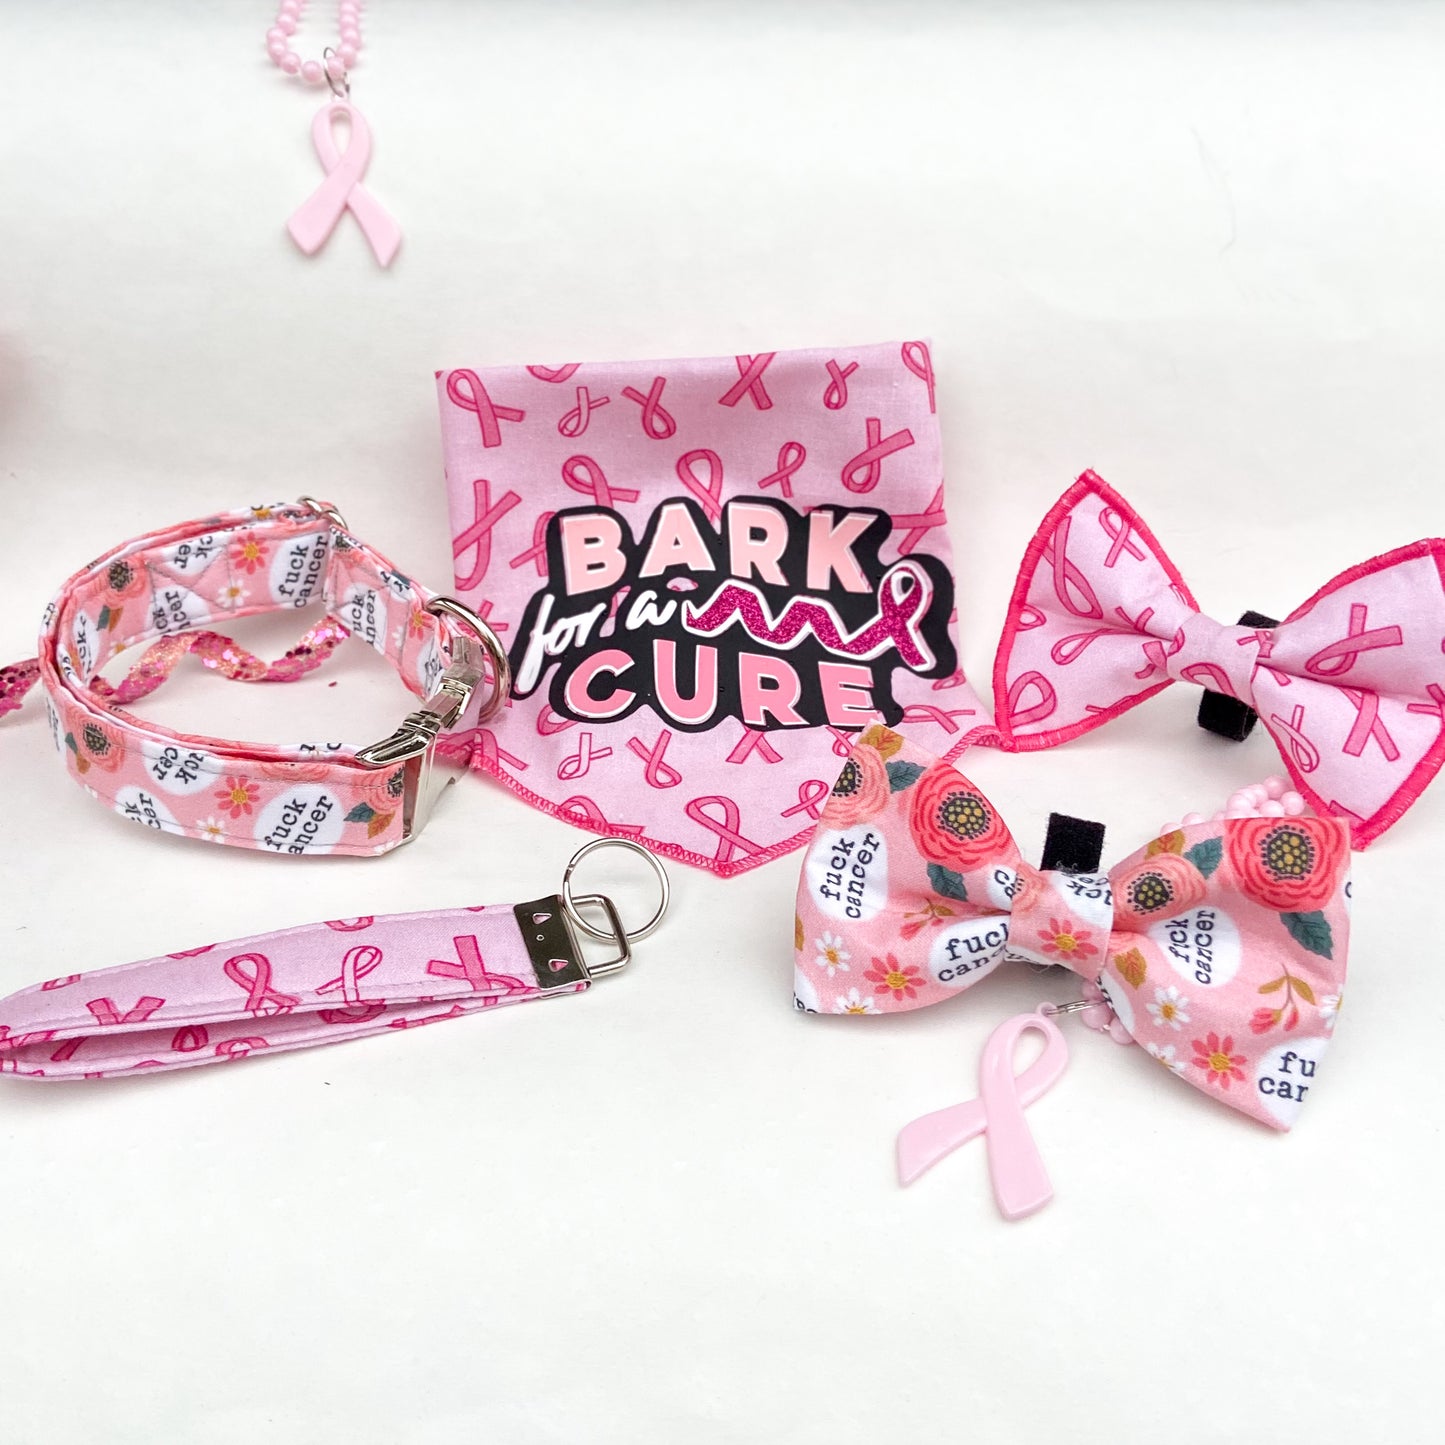 Fuck cancer pink floral dog bow pet accessory